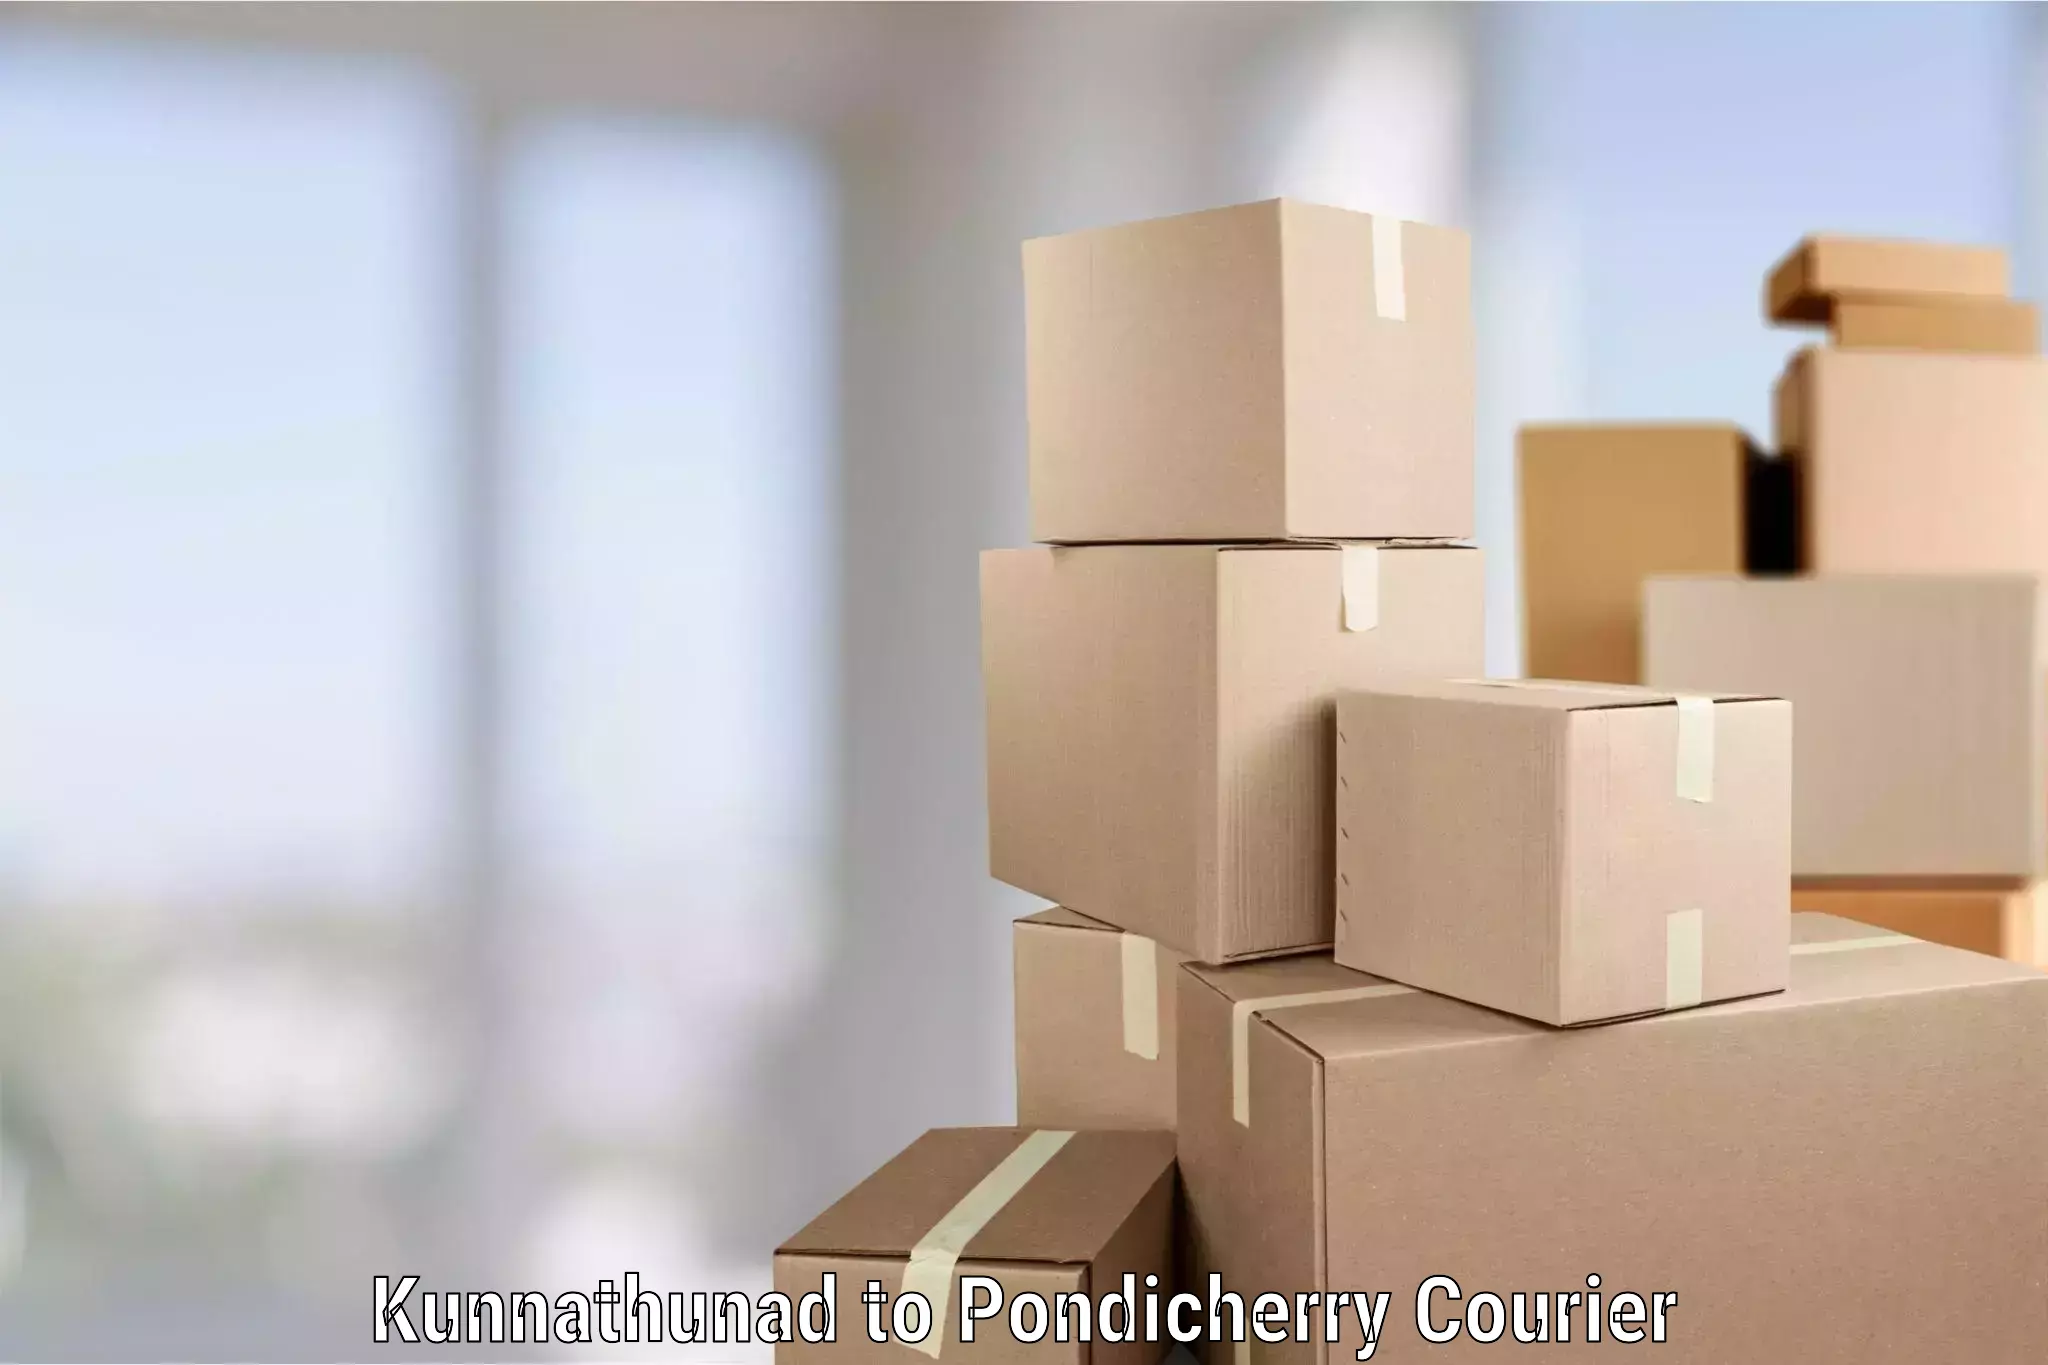 Quality relocation services in Kunnathunad to Pondicherry